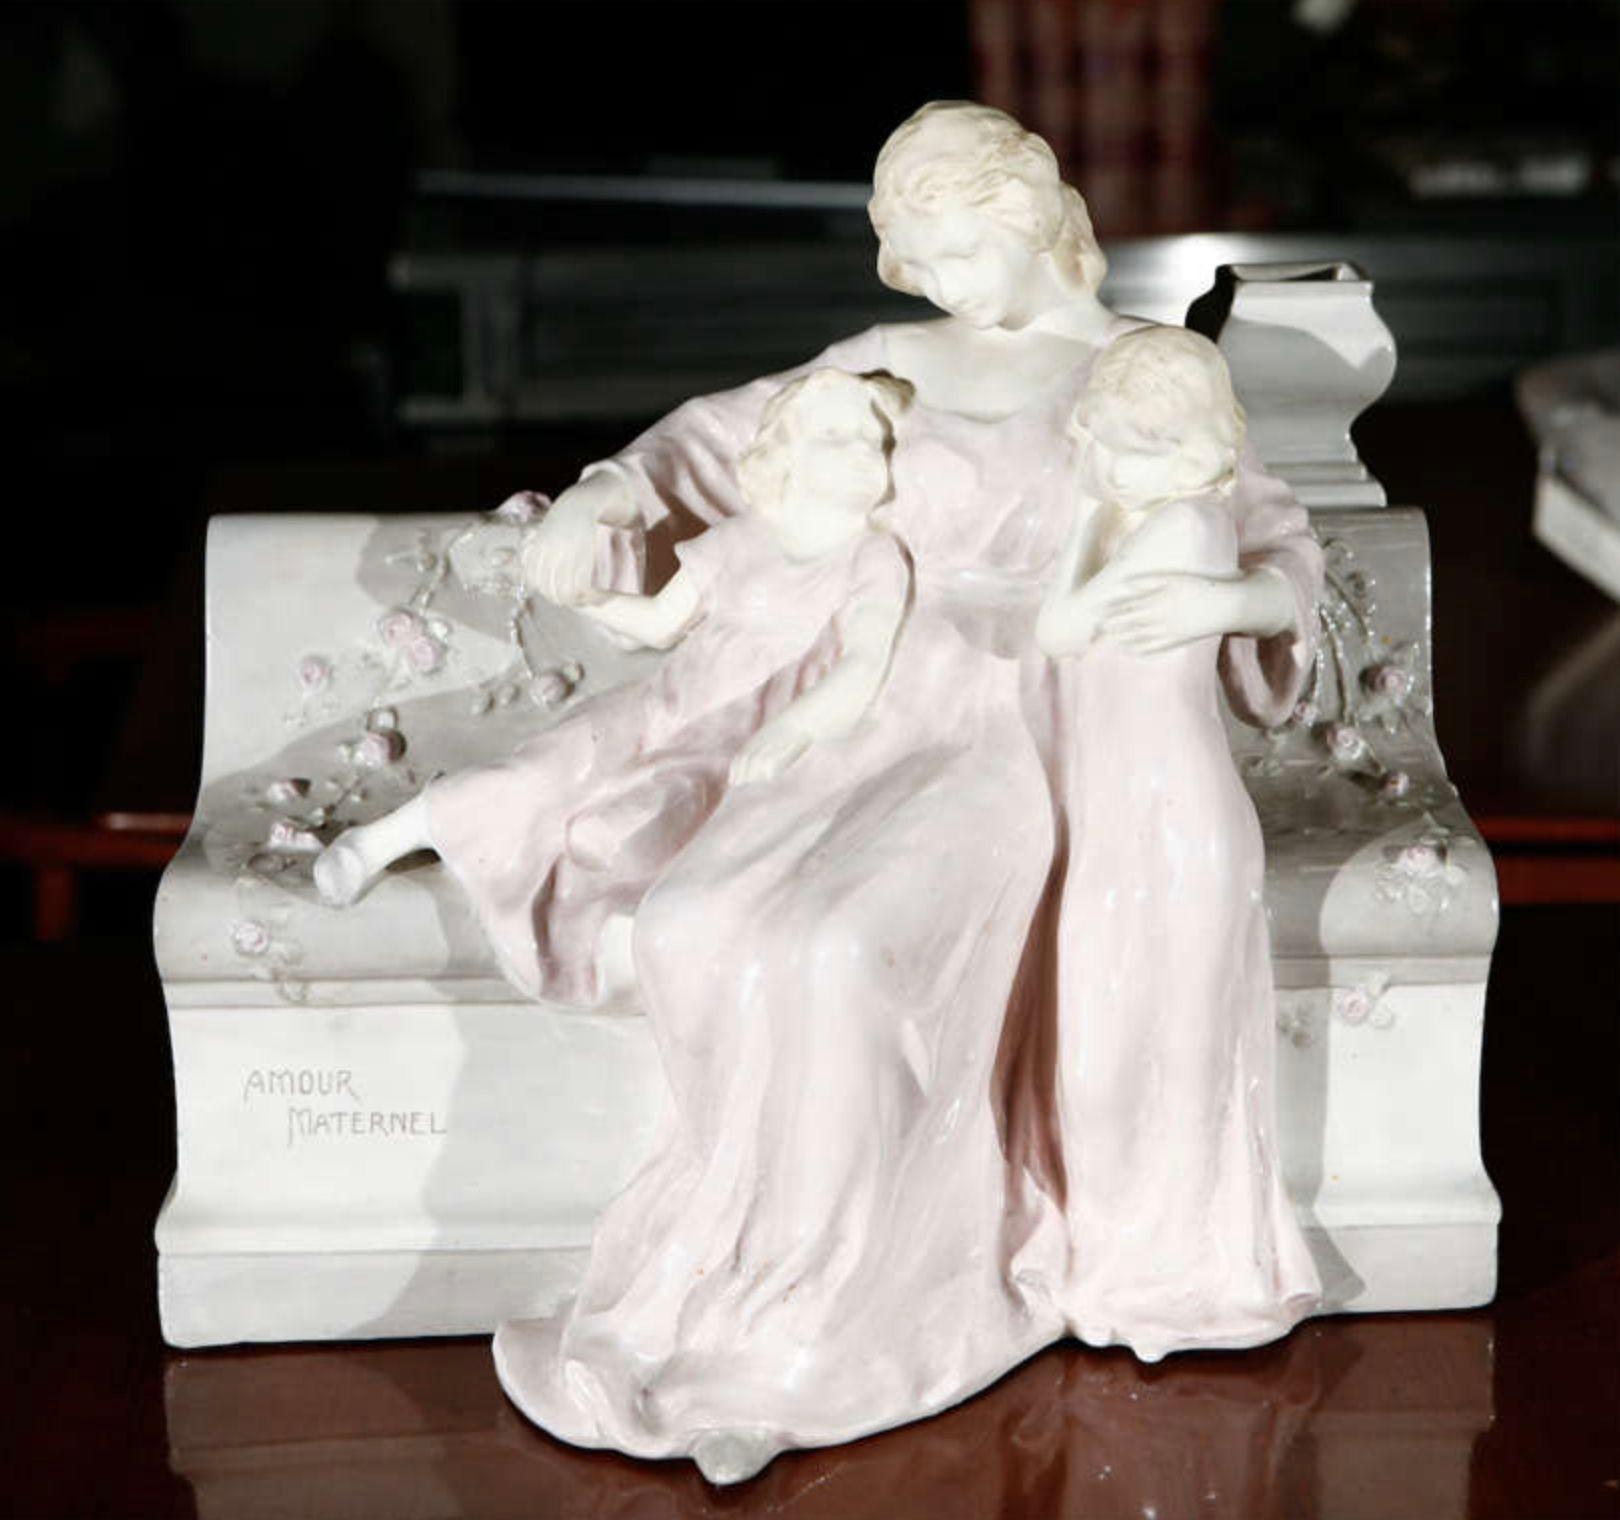 A Vienna faience porcelain figurine representing motherly love by Schauer. Bench and figures are porcelain. Faces and arms are in a bisque (flat) finish. Marked on the bottom Vienna Faience Schauer. Also impressed on the bottom 